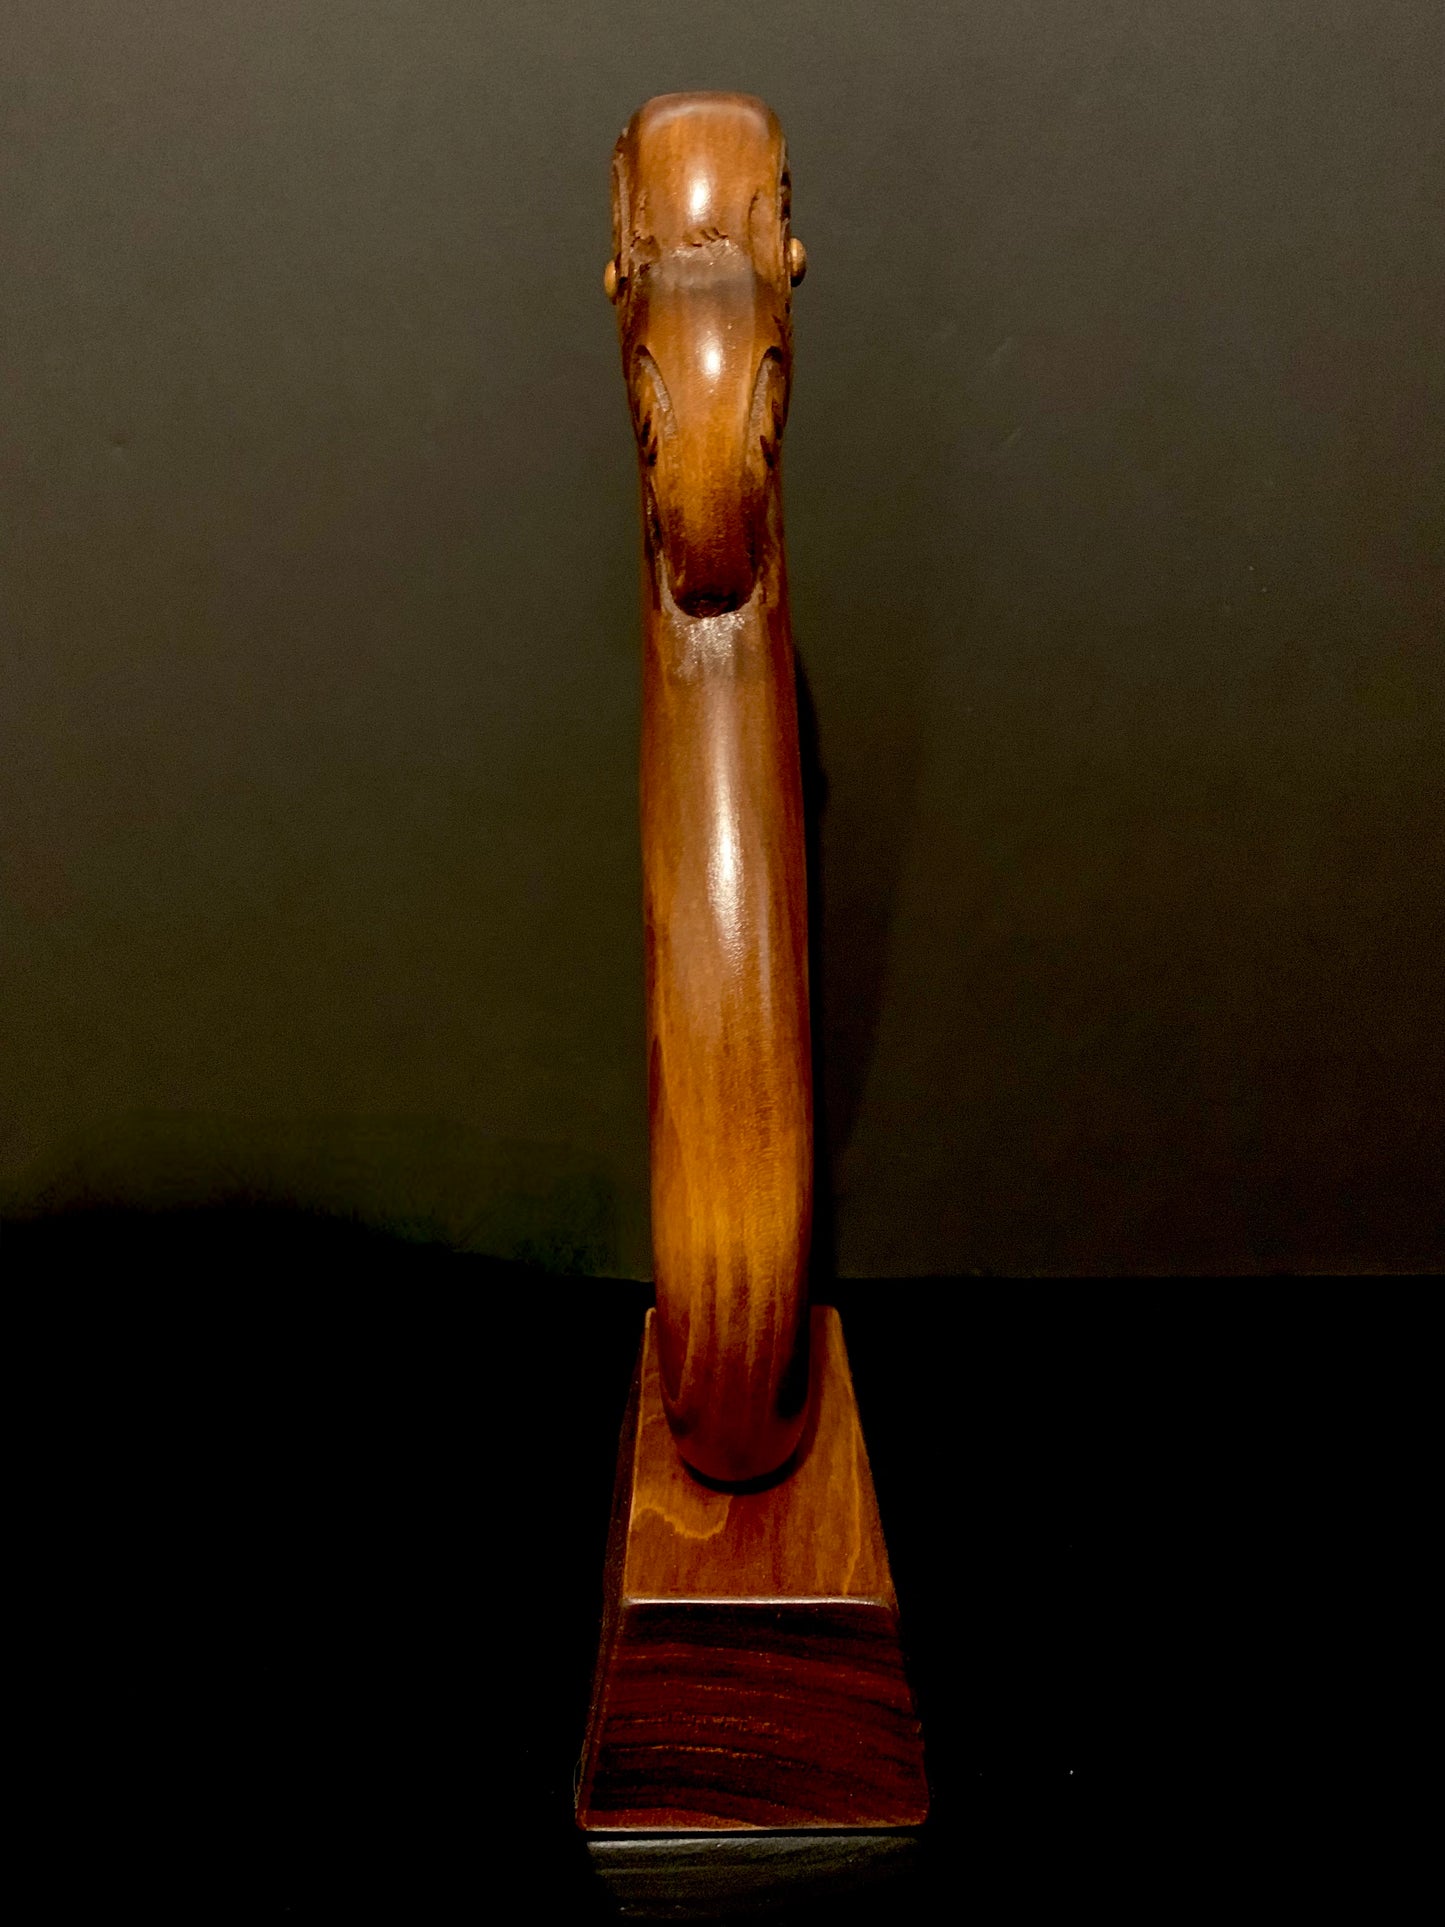 Carved Matau on stand - 32cm by Wood Masters